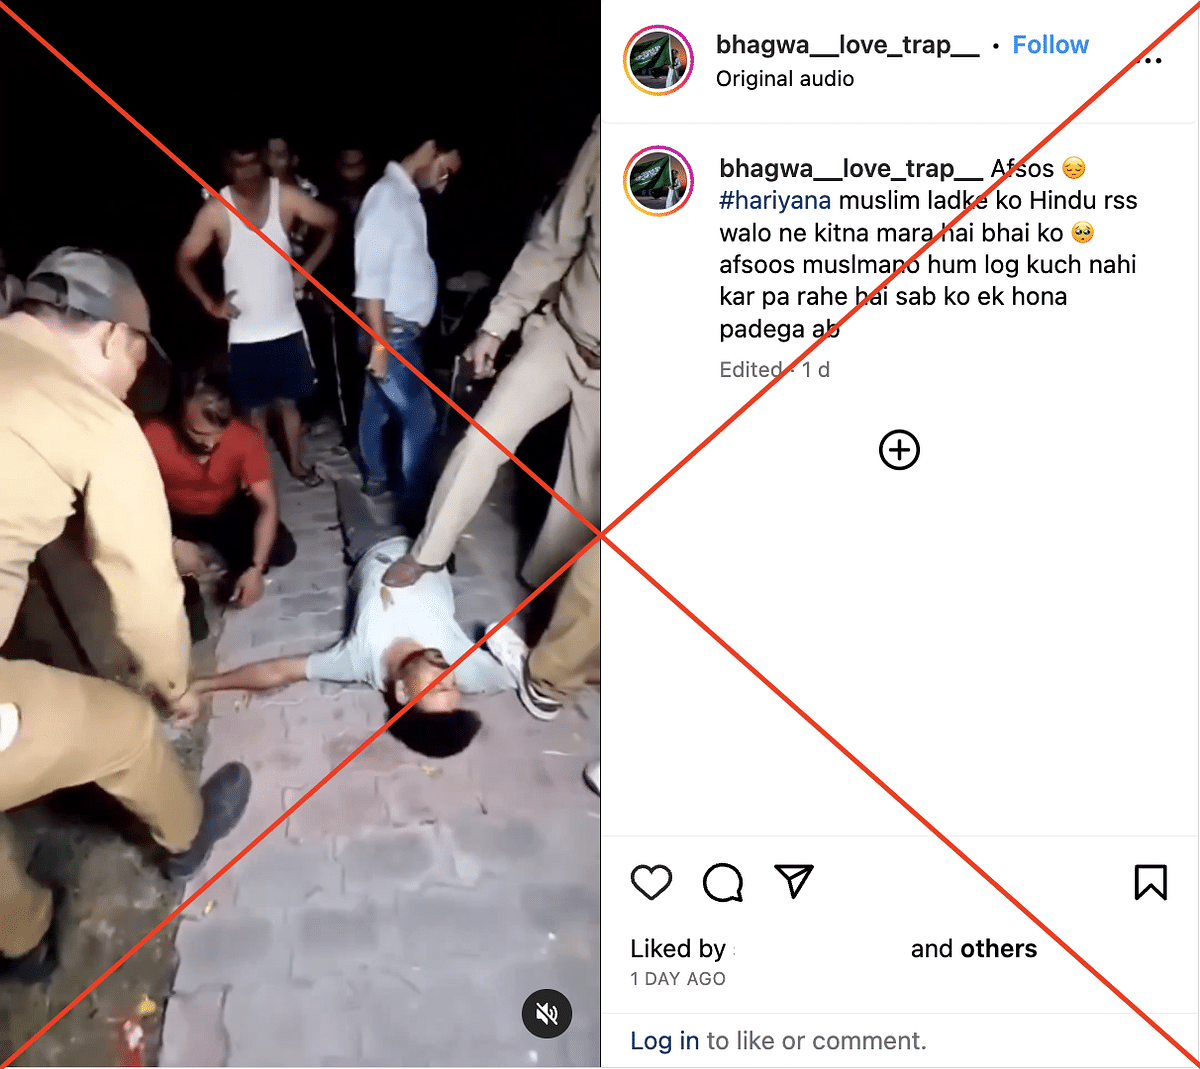 Amid Haryana violence, social media saw a rise in misinformation, including several emotionally charged posts.